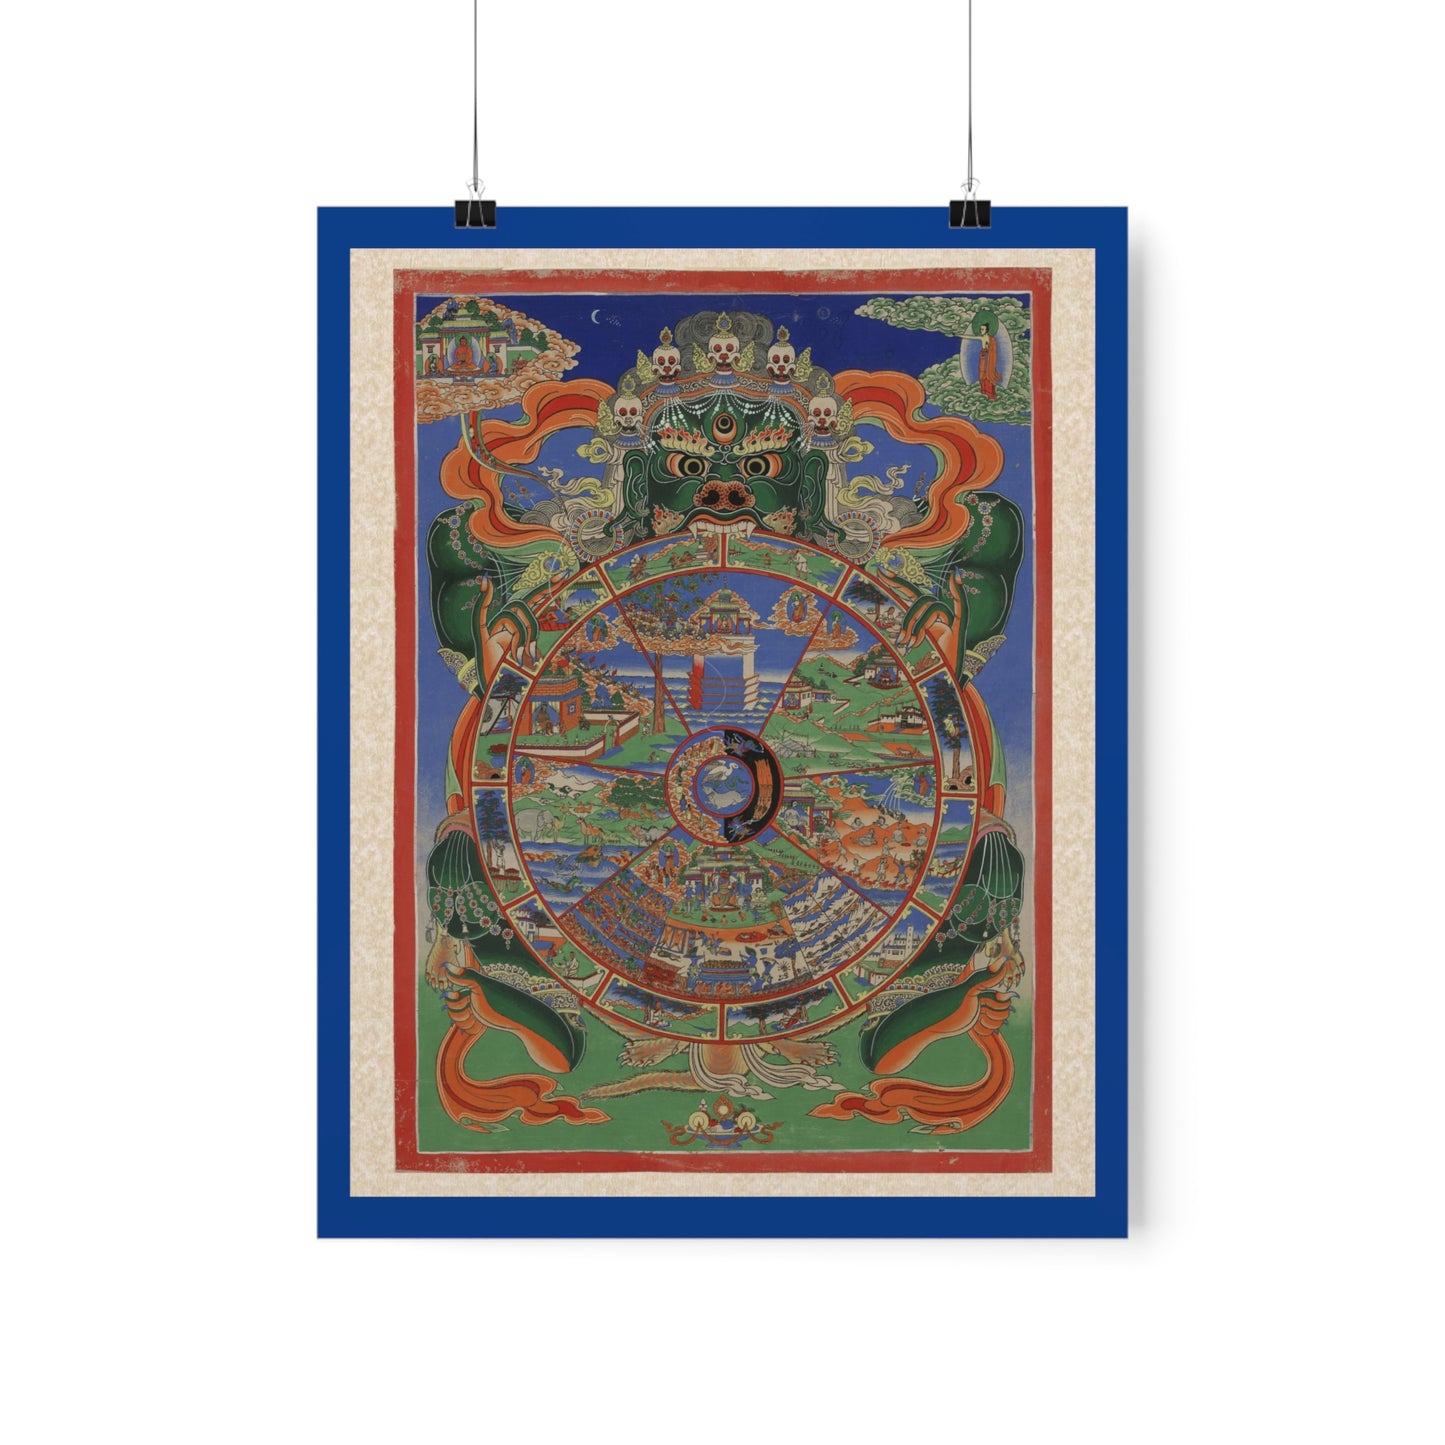 A 20th century Tibetan Buddhist textile painting (thangka), featuring the 6 realms of existence, the 3 root poisons, and the 12 links of dependent origination.